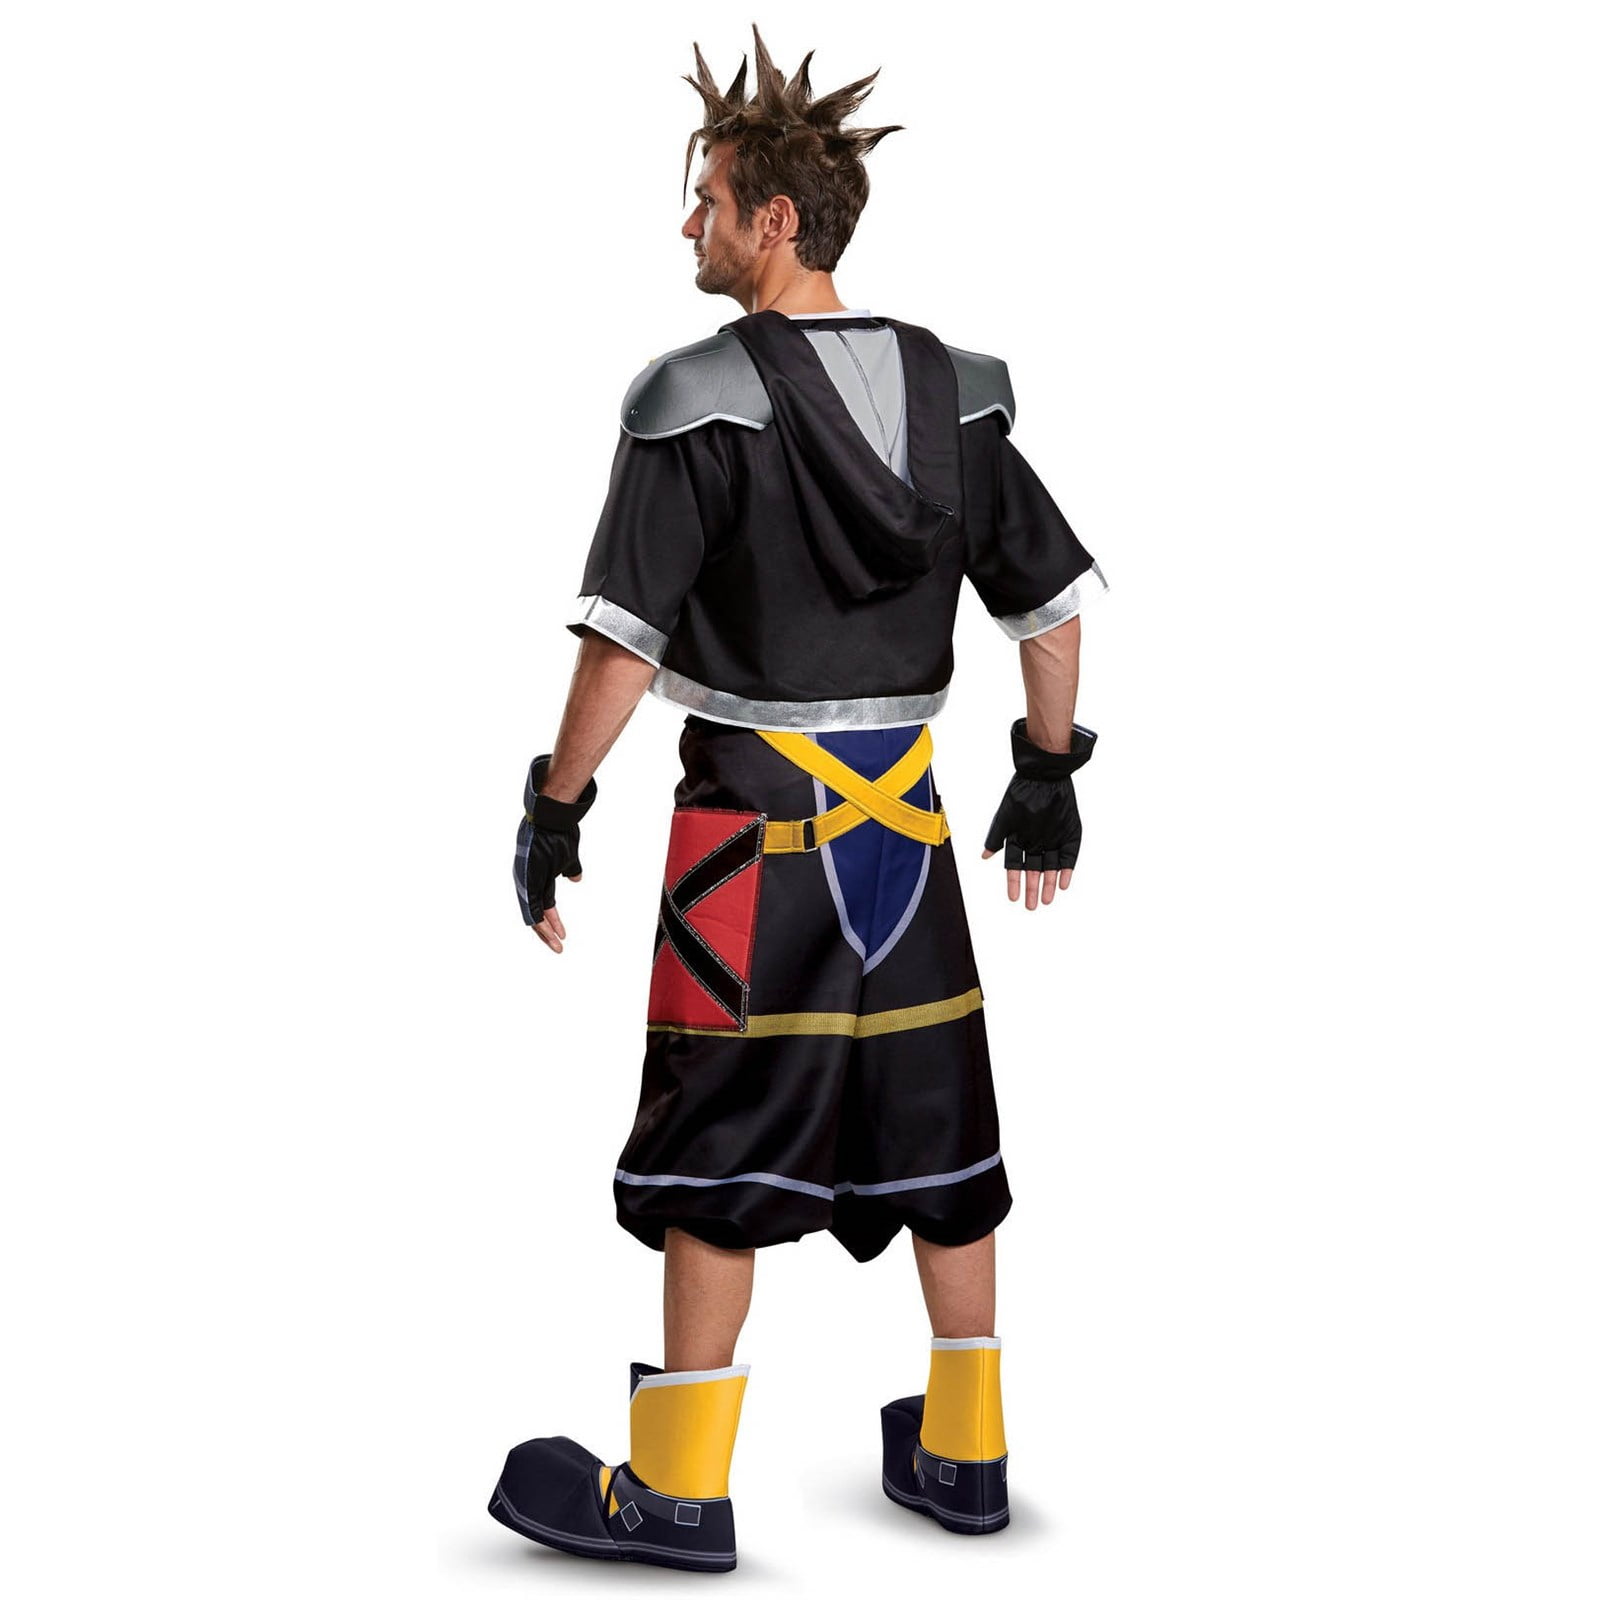 The 10 Best Sora Outfits in Kingdom Hearts